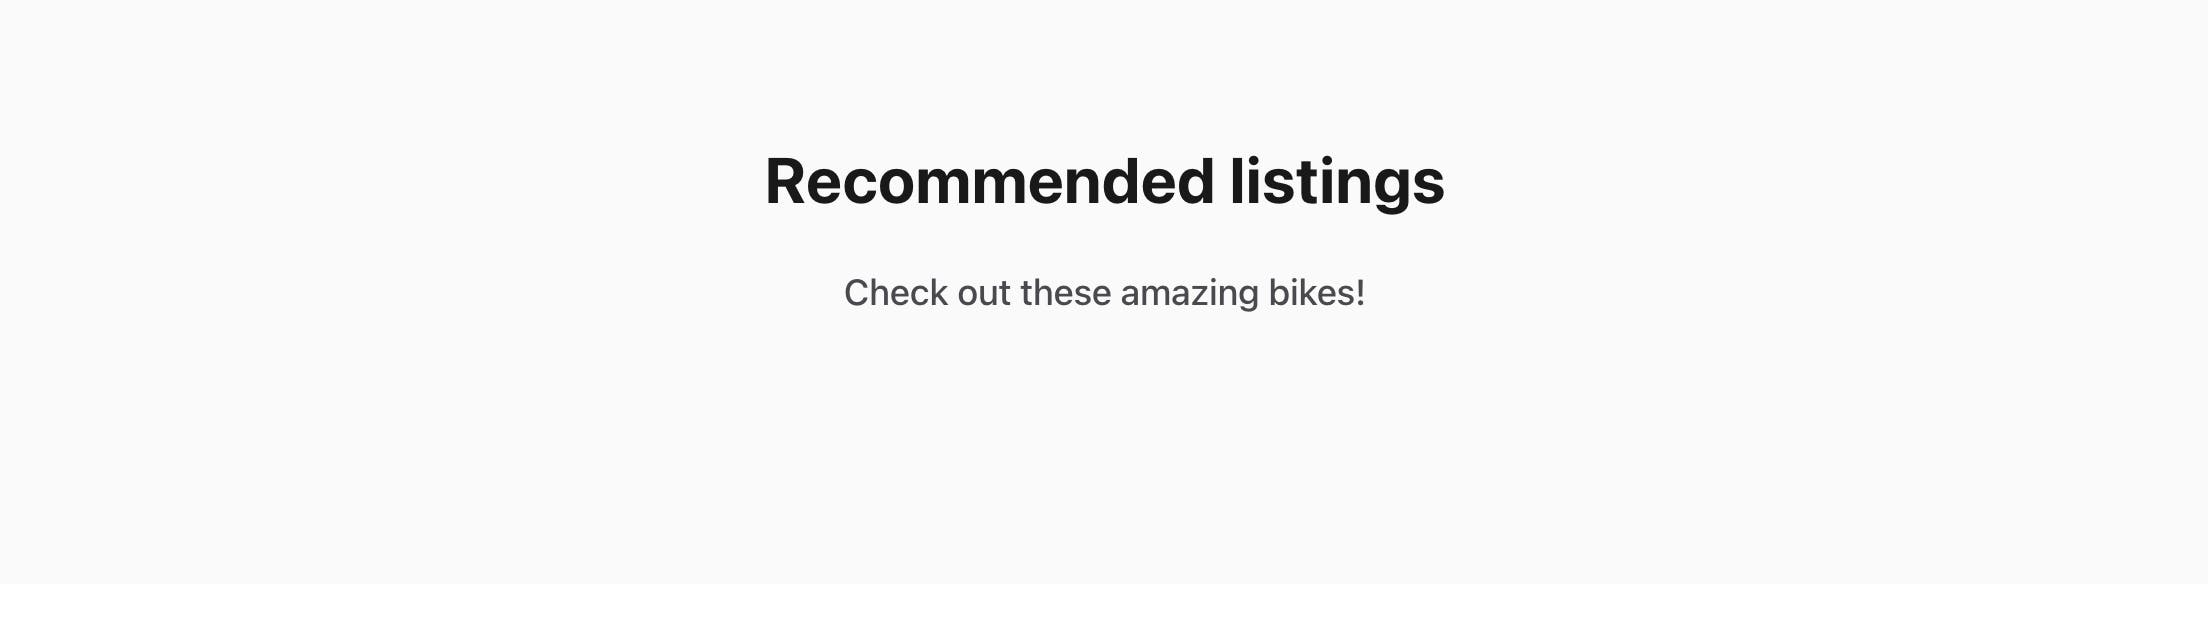 Black text on a white background. A title says "Recommended listings" and an ingress says "Check out these amazing bikes!"